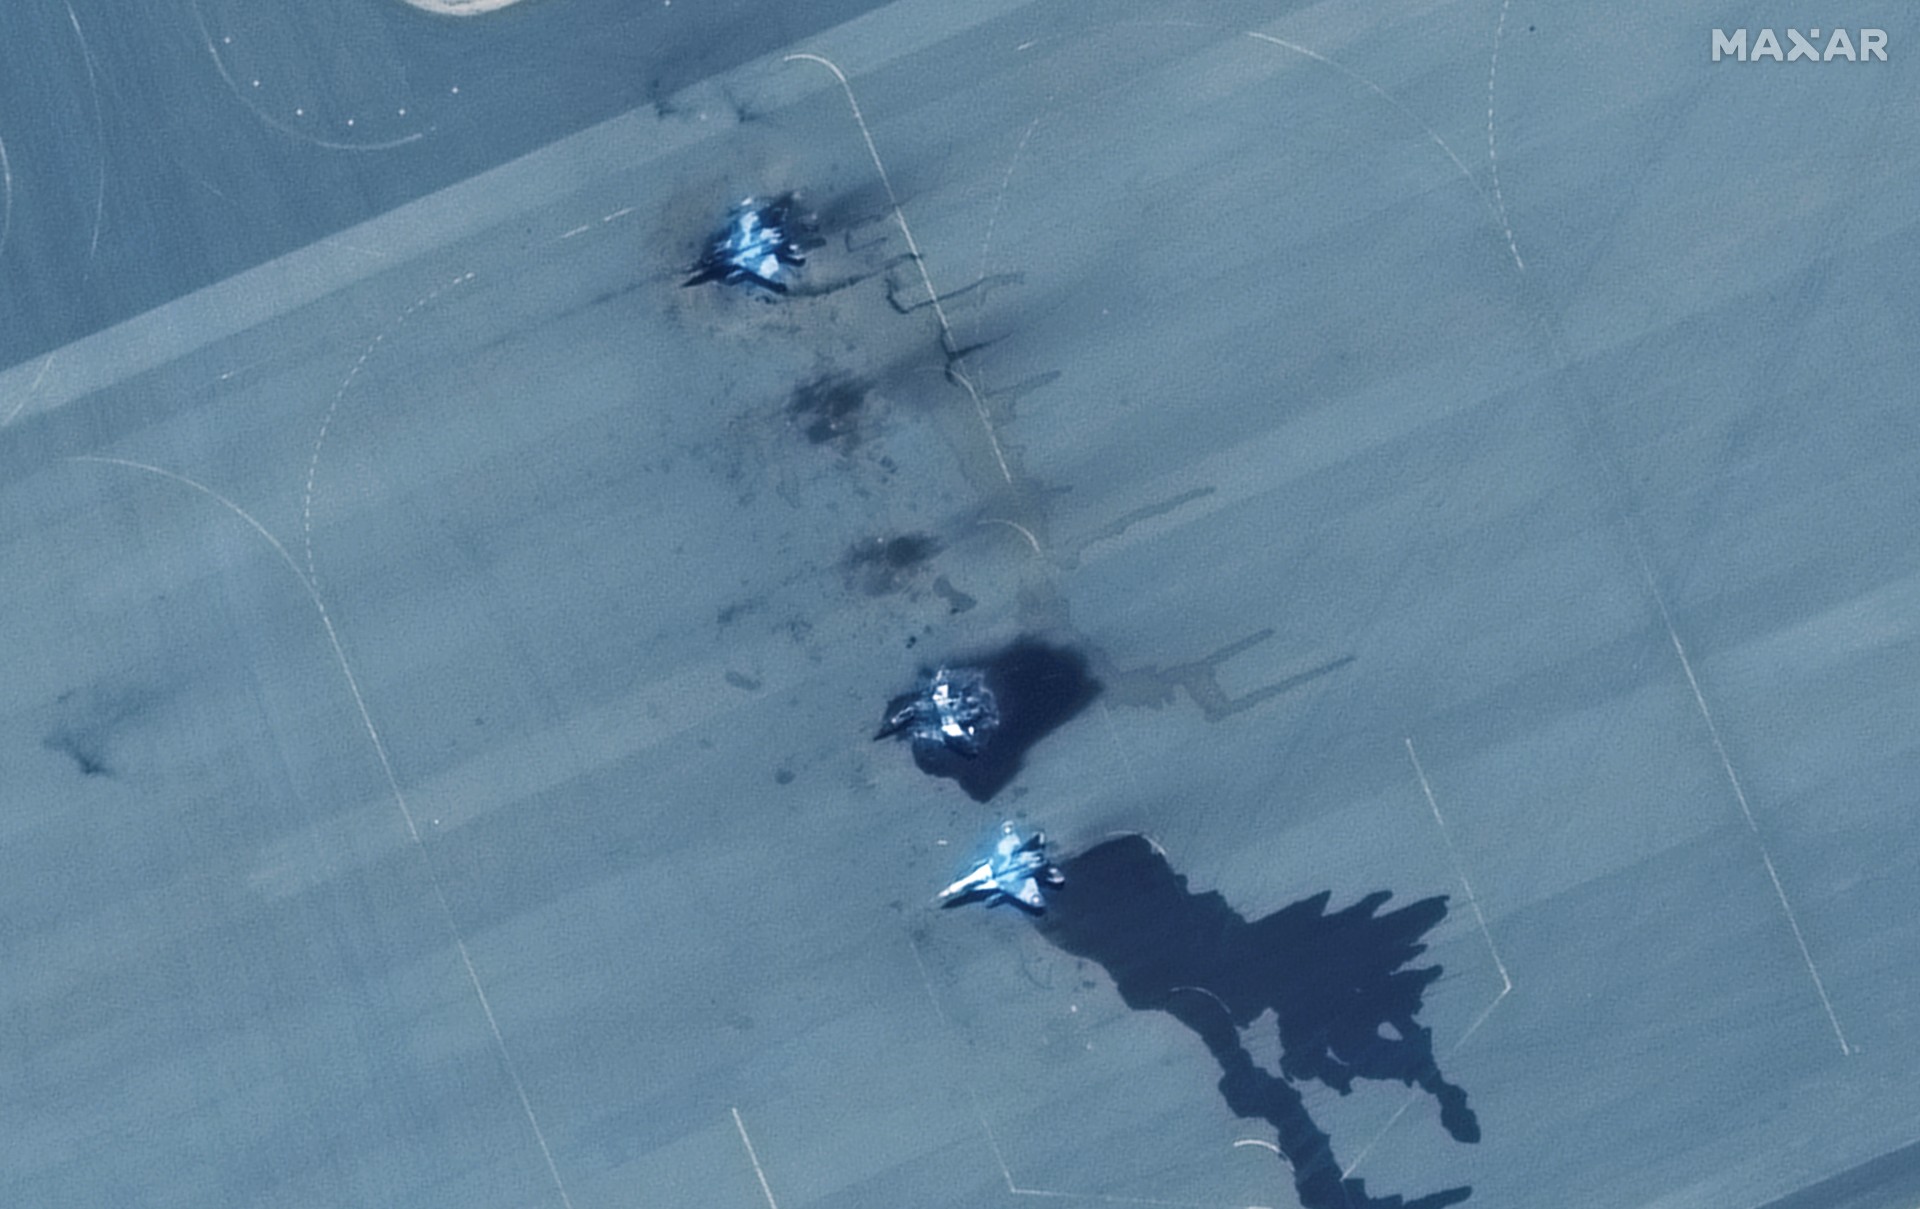 Satellite image shows a closer view of damaged MiG-29 fighter aircraft at the Merowe Airbase, Sudan, 18 April (Reuters)